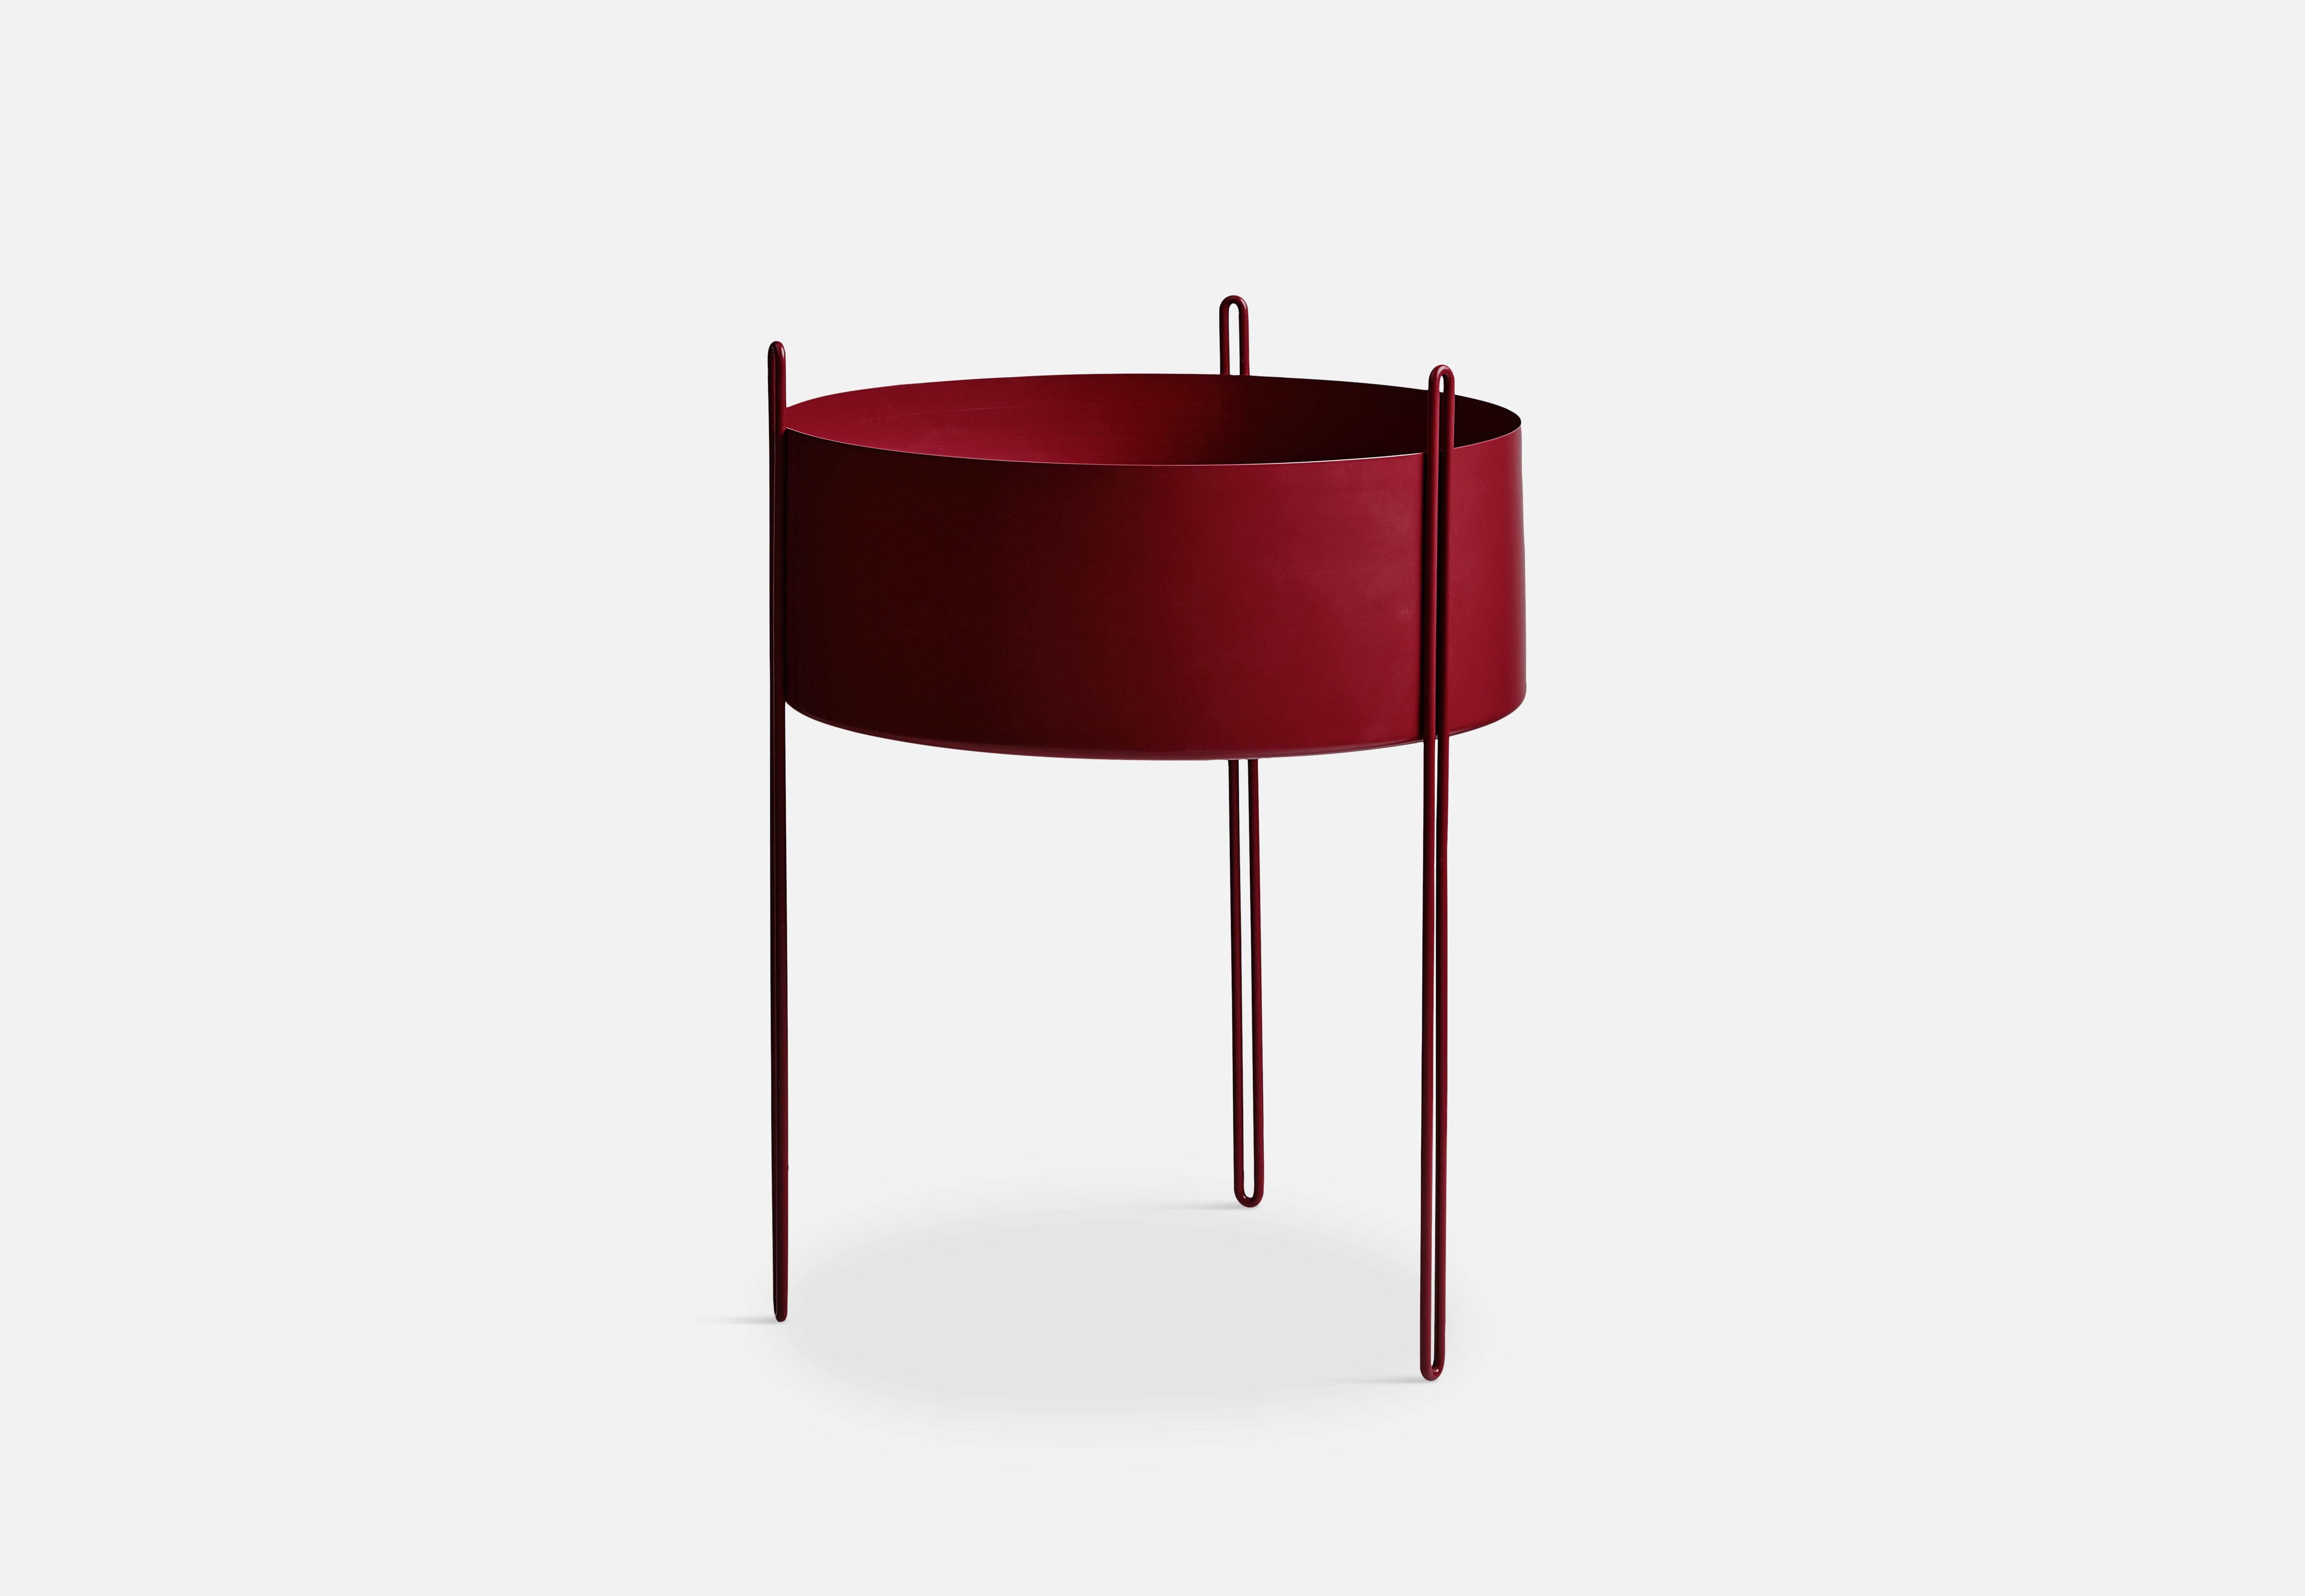 Large red pidestall planter by Emilie Stahl Carlsen.
Materials: metal.
Dimensions: D 40 x H 55 cm.
Available in grey, red, taupe or black and in 3 sizes: D 15 x H 15, D 40 x H 35, D 40 x H 55 cm.

Emilie Stahl Carlsen is a Nor wegian designer